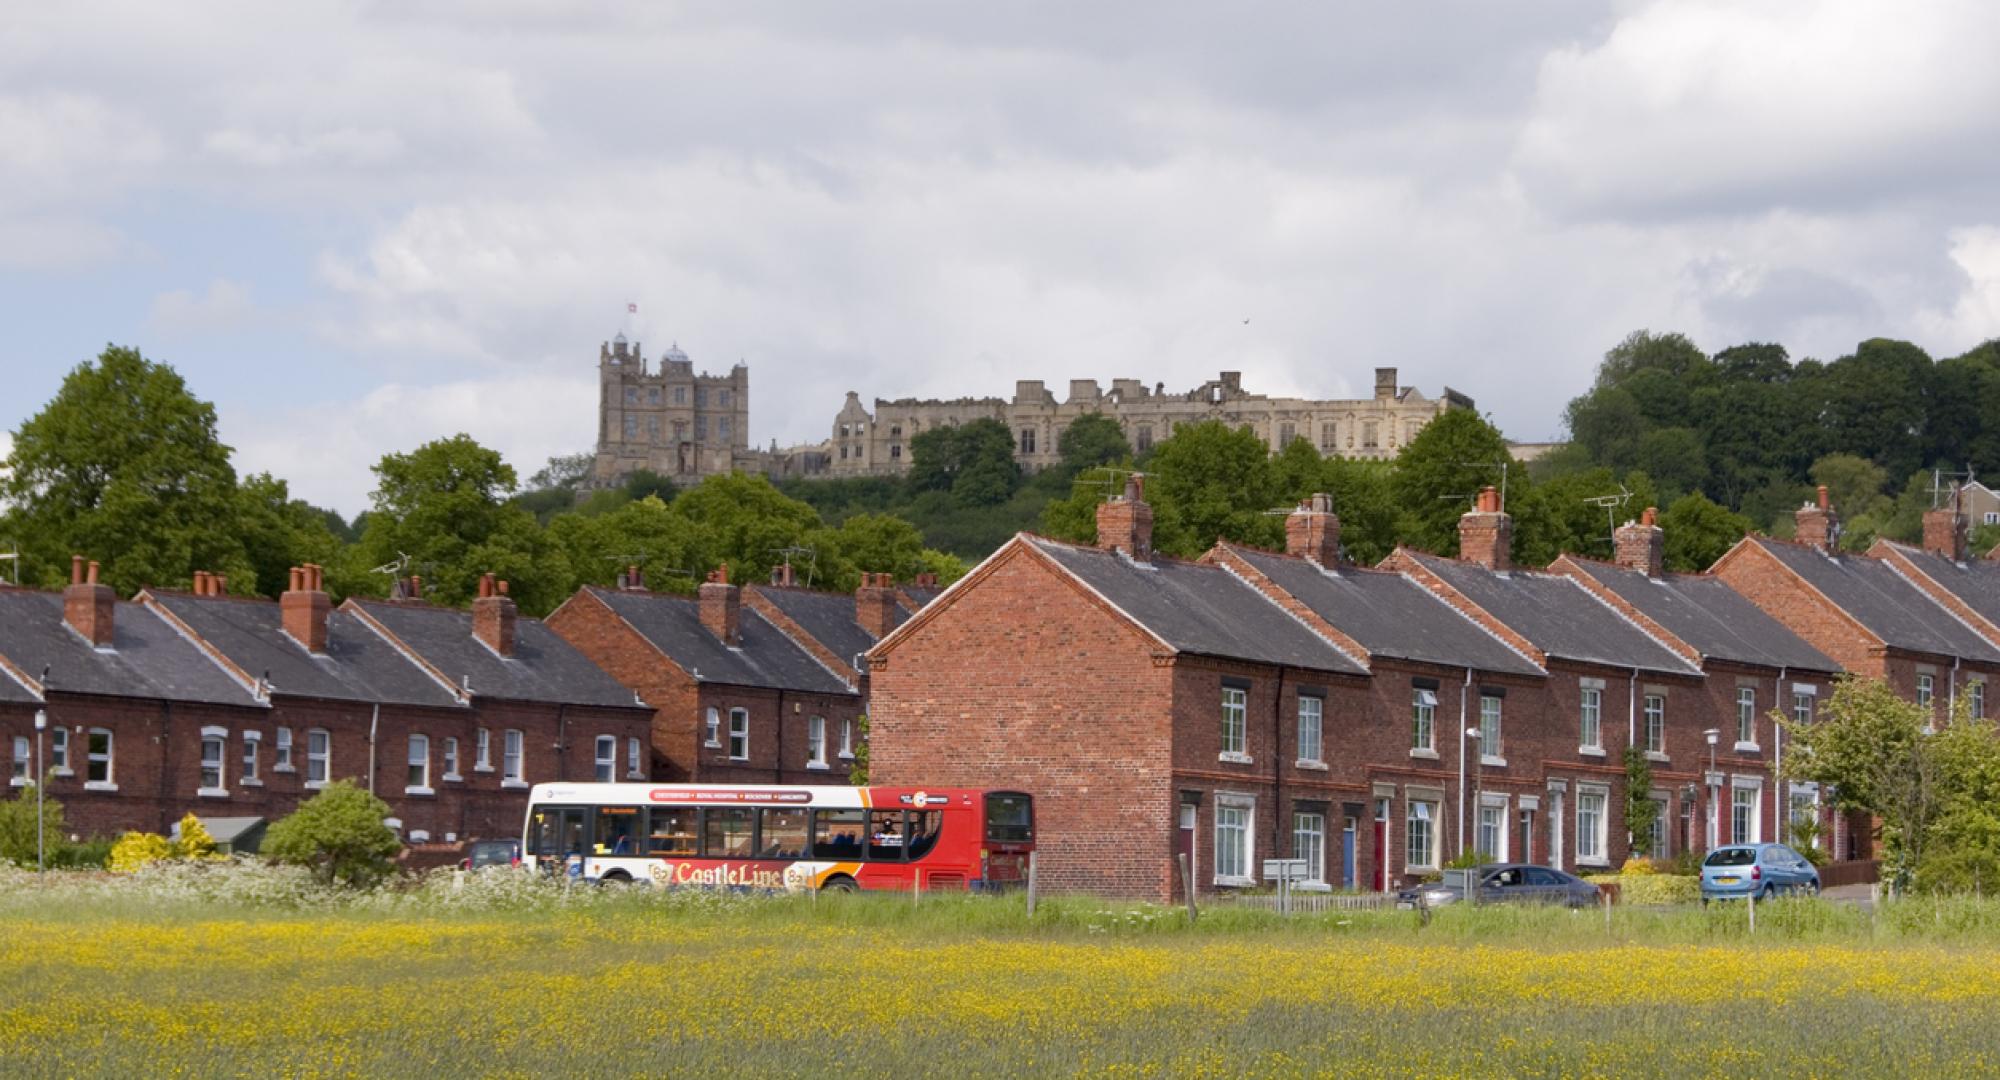 Bolsover with a view of the castle in the background